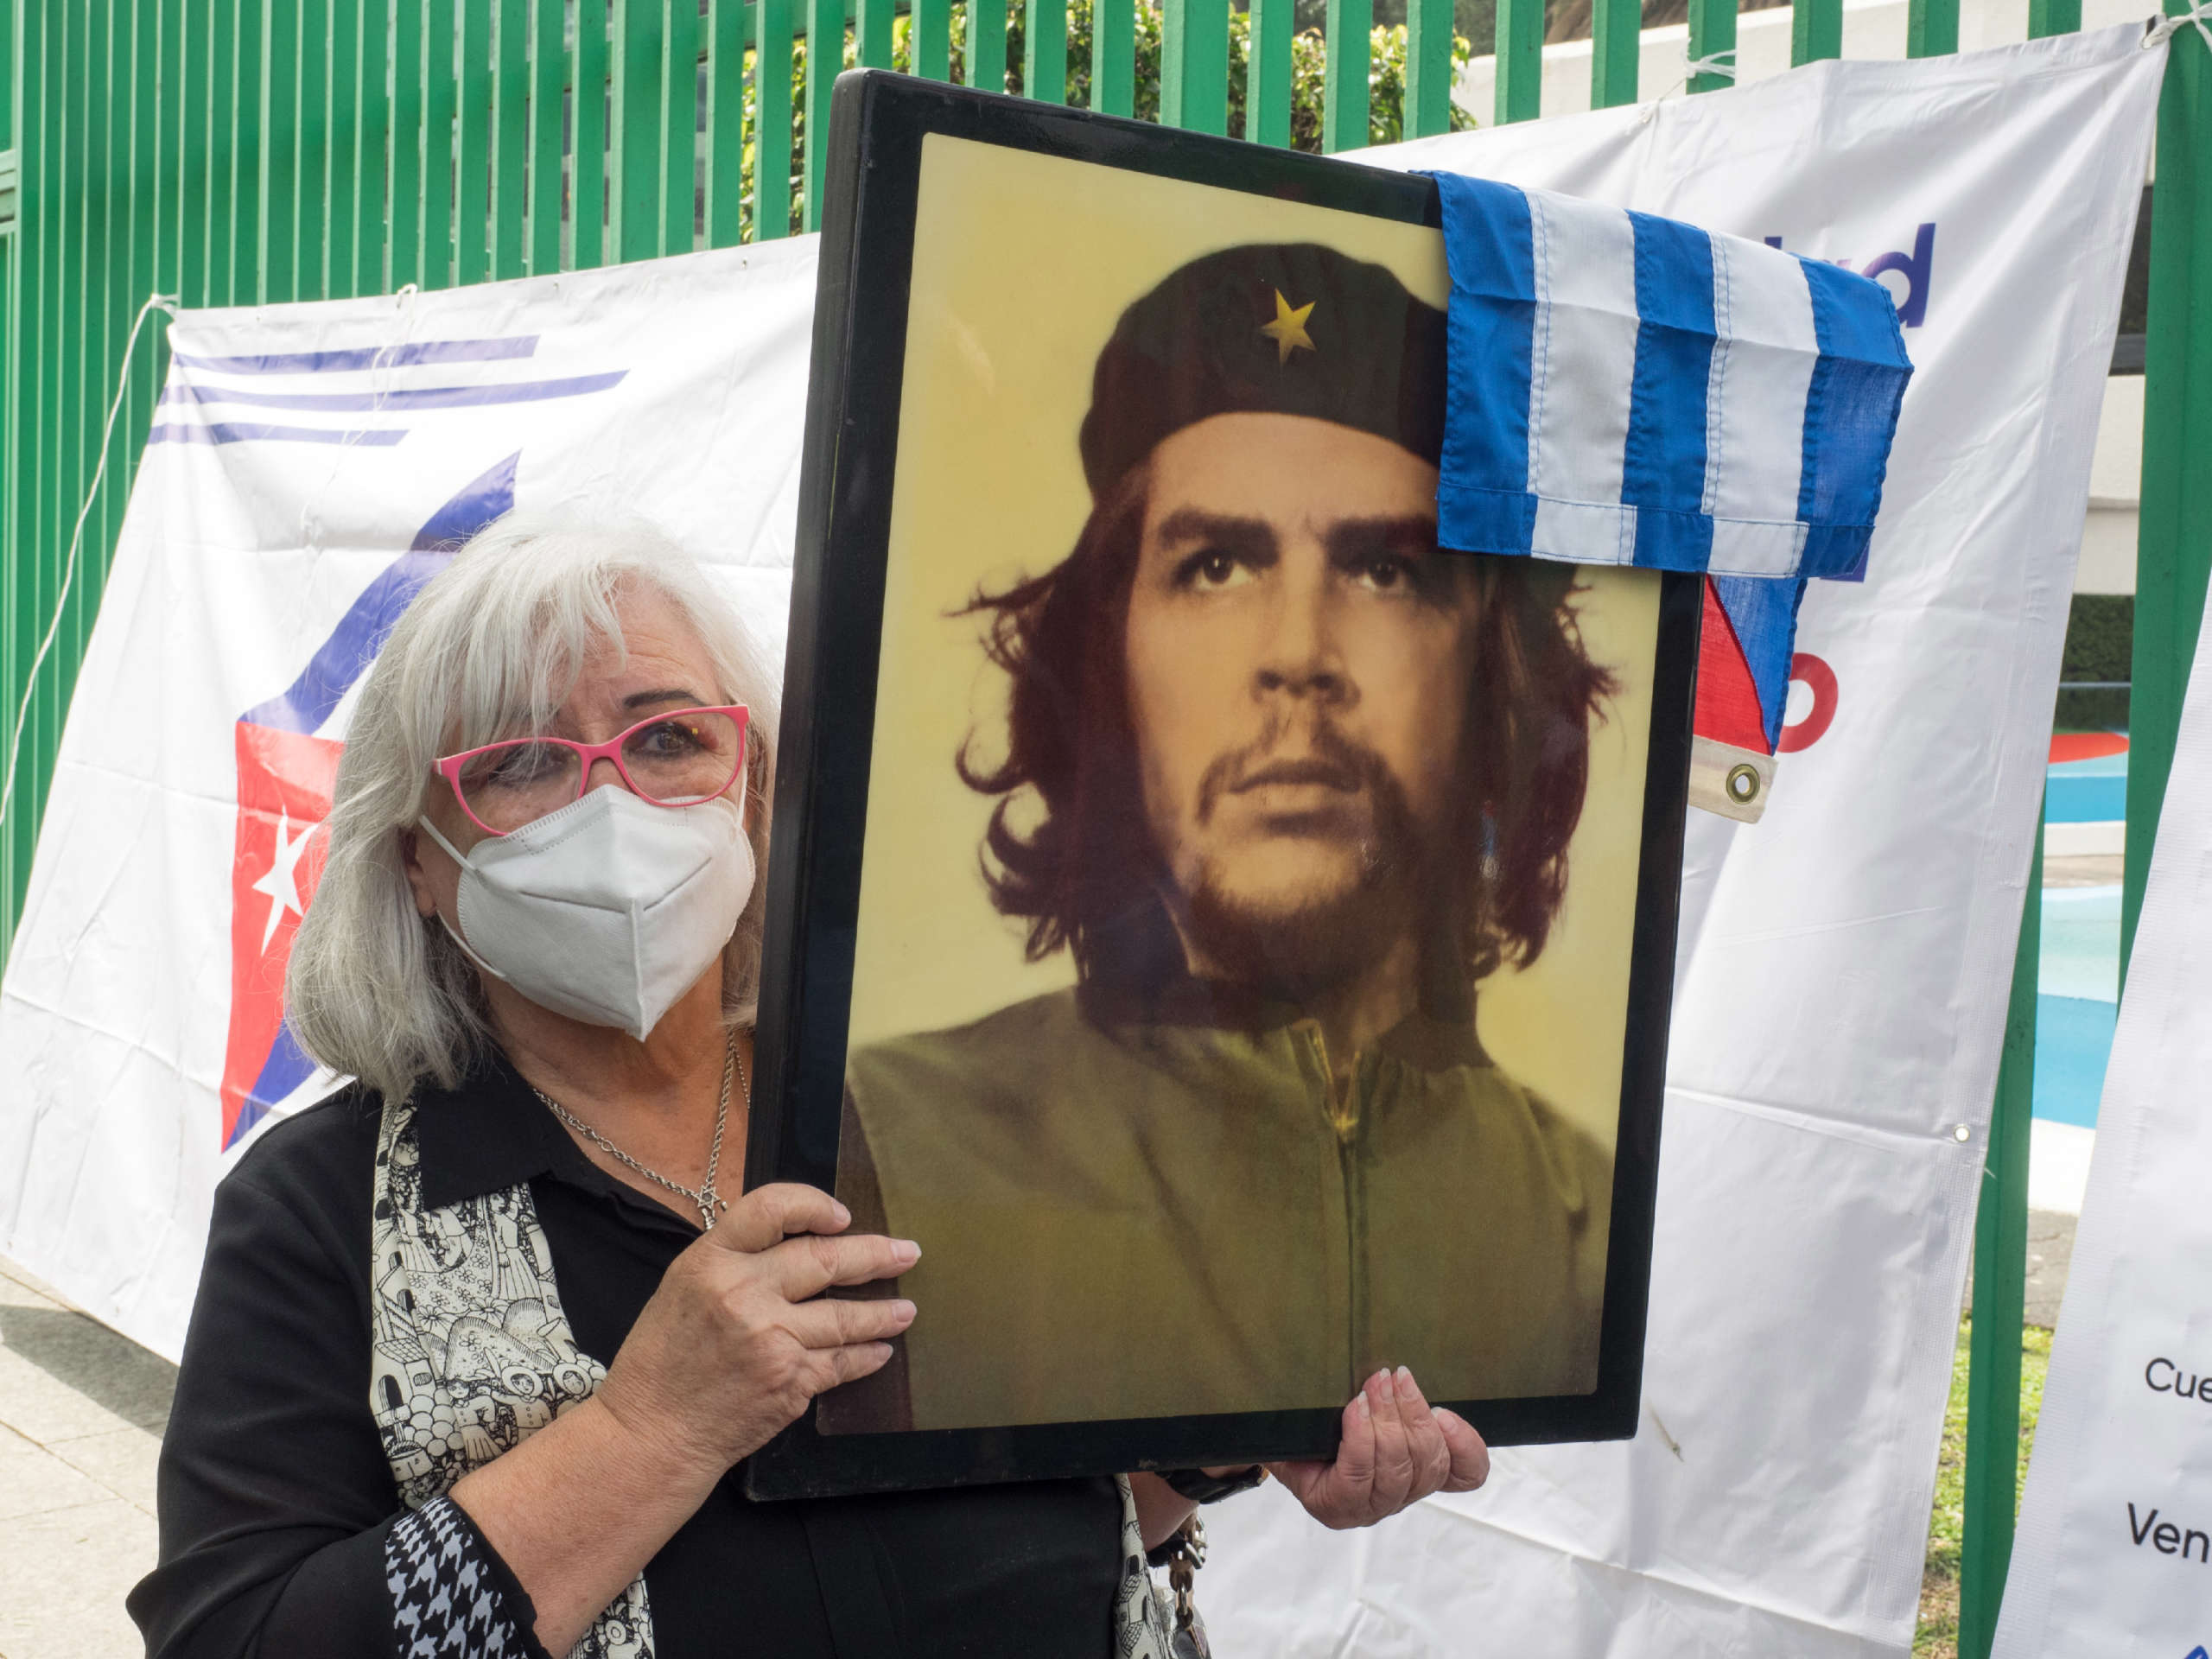 A woman holds up a picture of Latin American revolutionary Ernesto "Che" Guevara during a demonstration in solidarity with the Cuban Revolution in front of the Cuban embassy in Mexico City, Mexico, July 17, 2021.